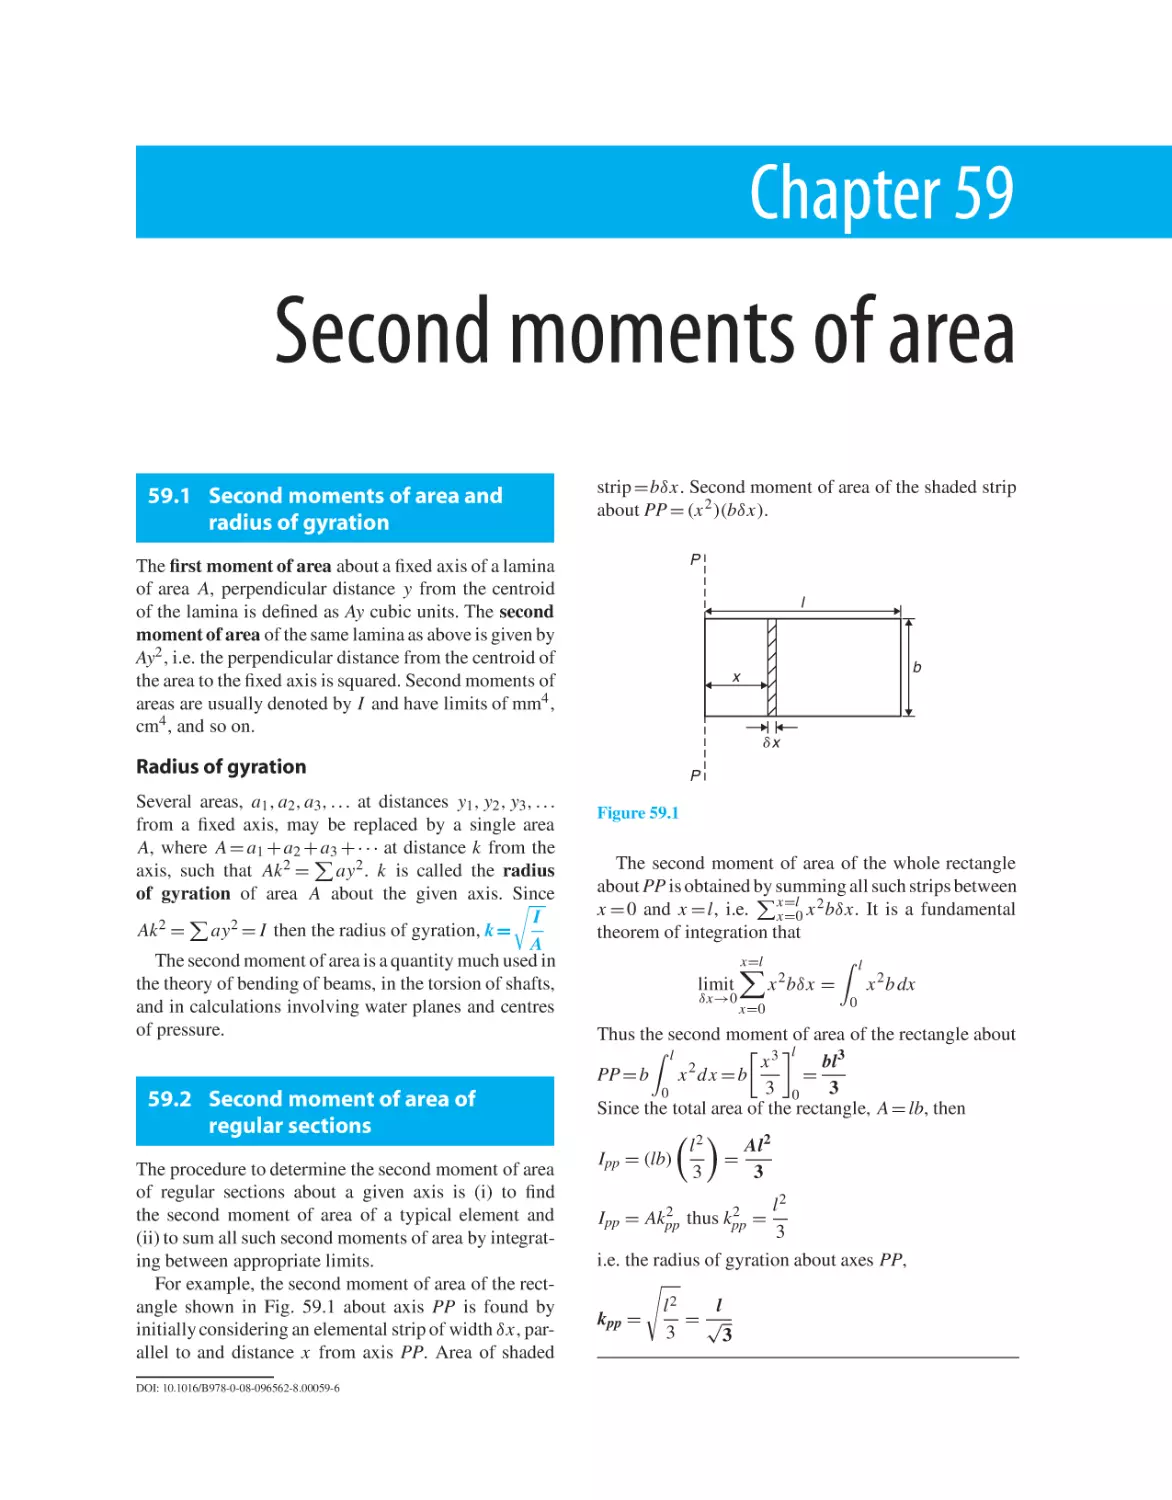 Chapter 59. Second moments of area
59.1 Second moments of area and radius of gyration
59.2 Second moment of area of regular sections